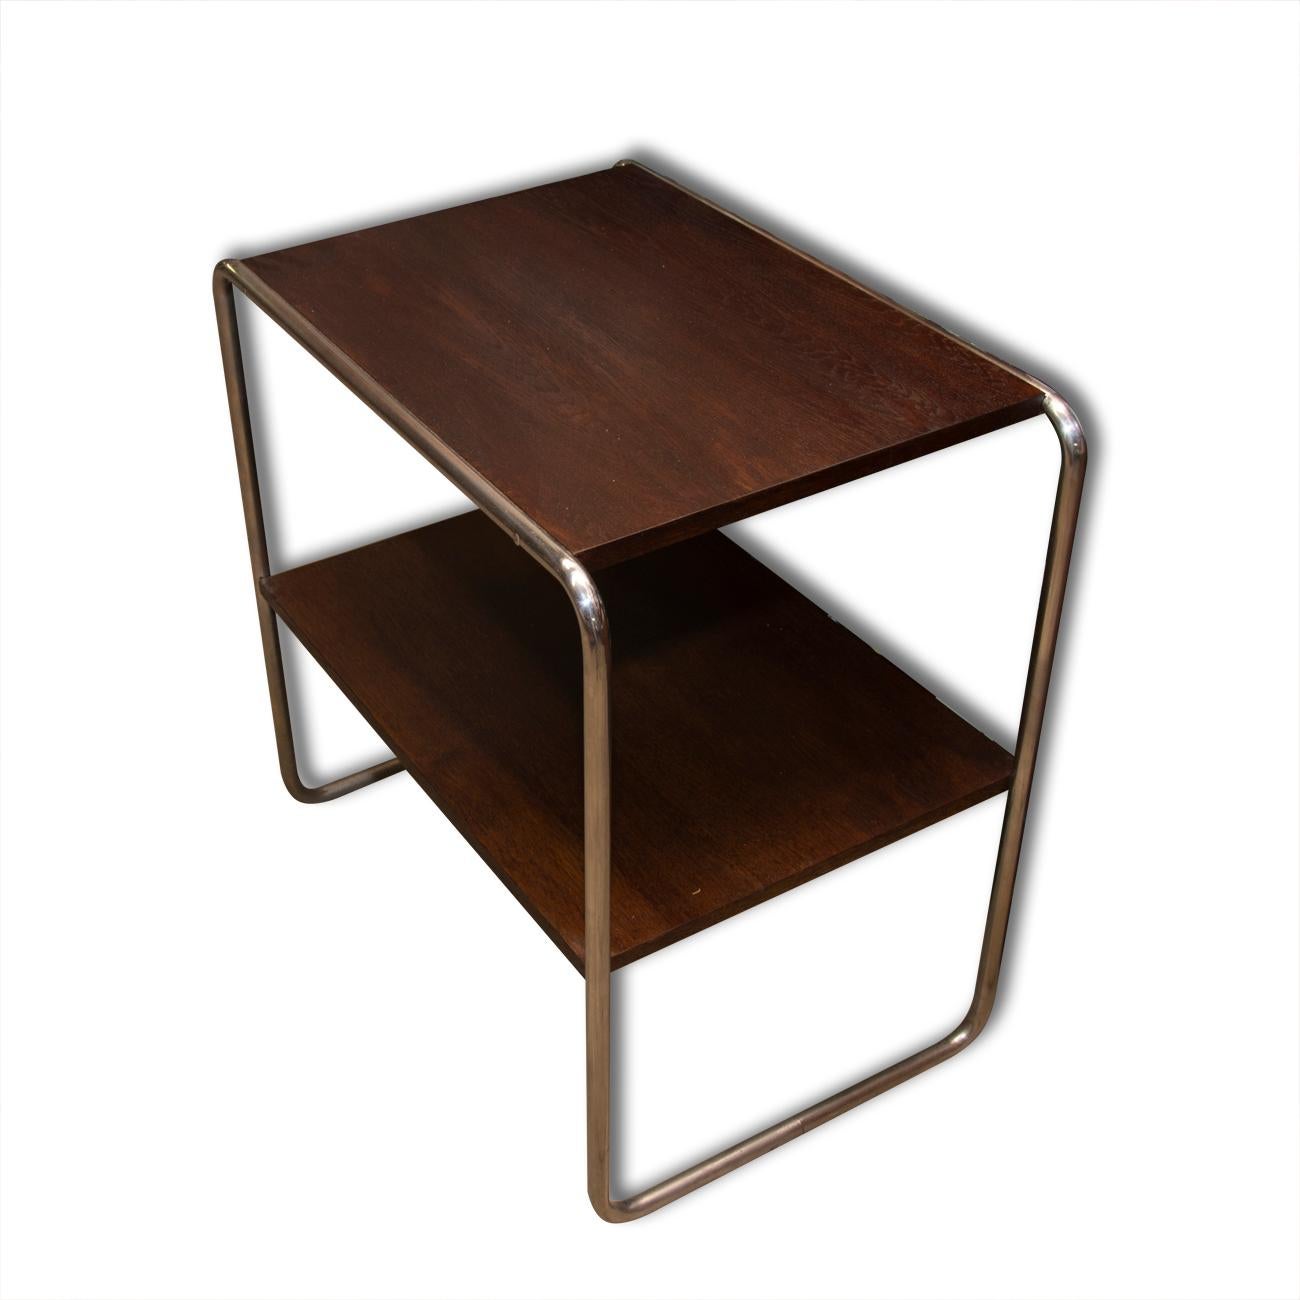 Bauhause Side Table designed by Marcel Breuer, 1930s 1